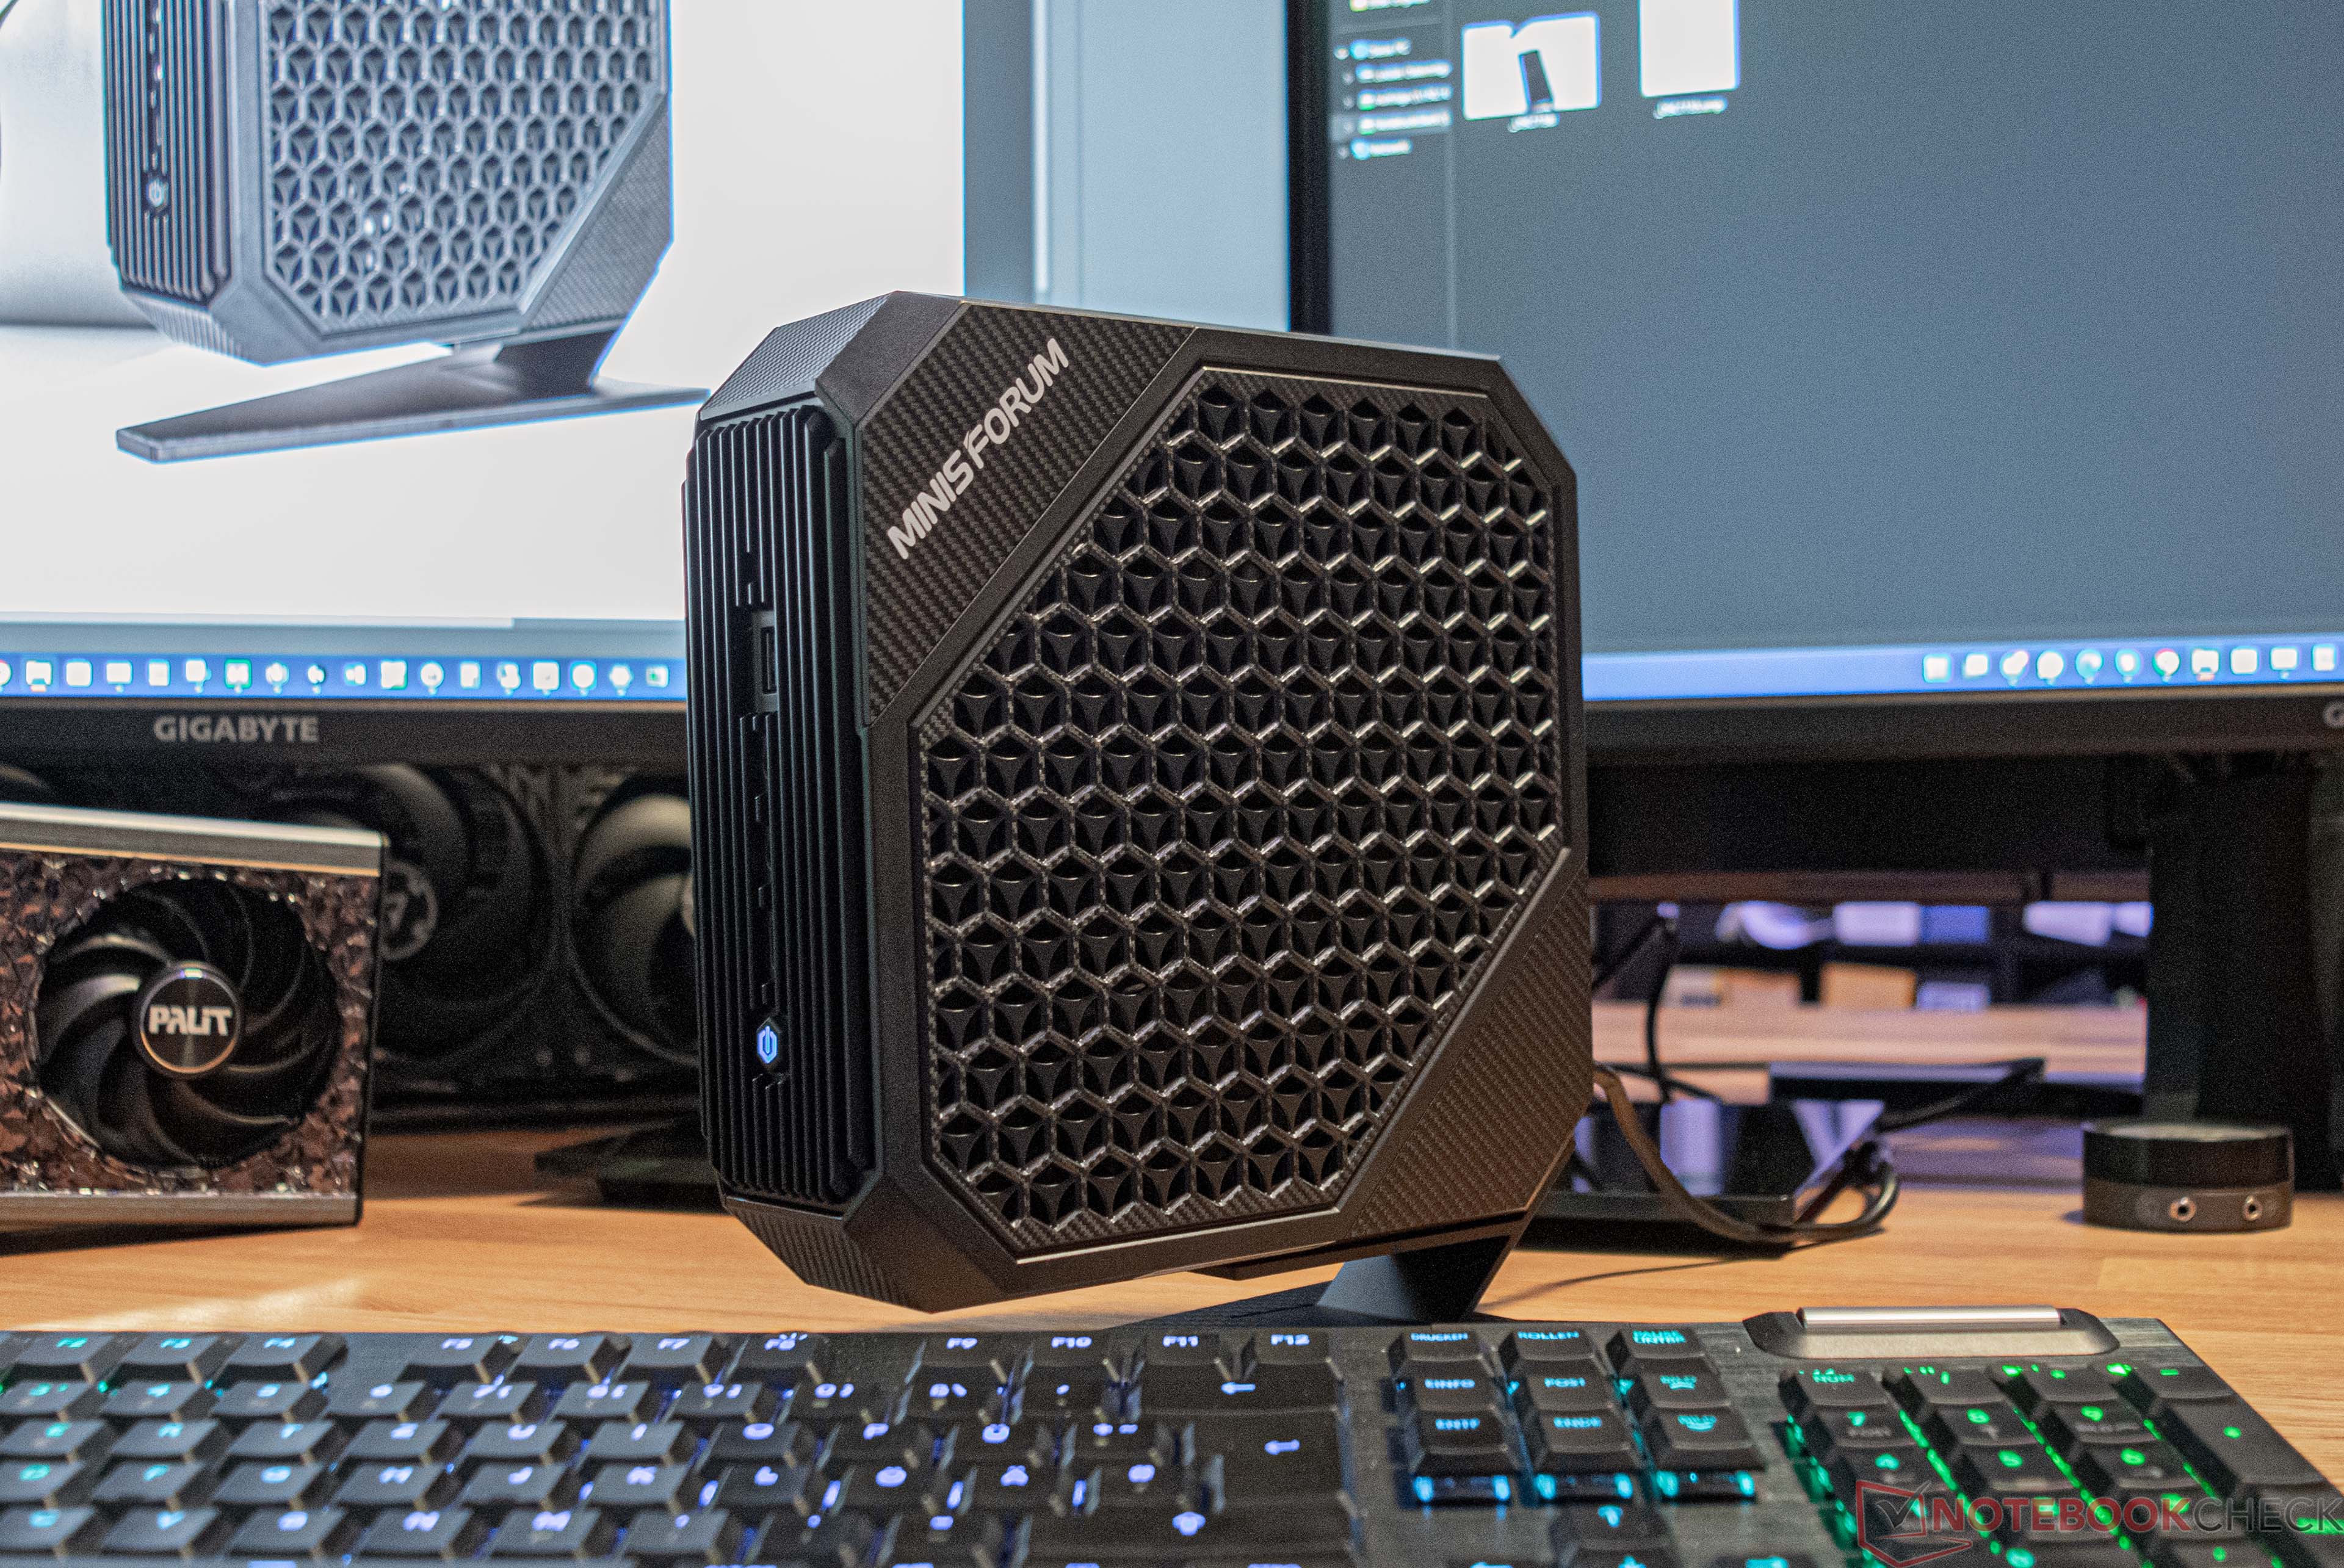 How to Make Your Gaming PC Quieter - Kingston Technology